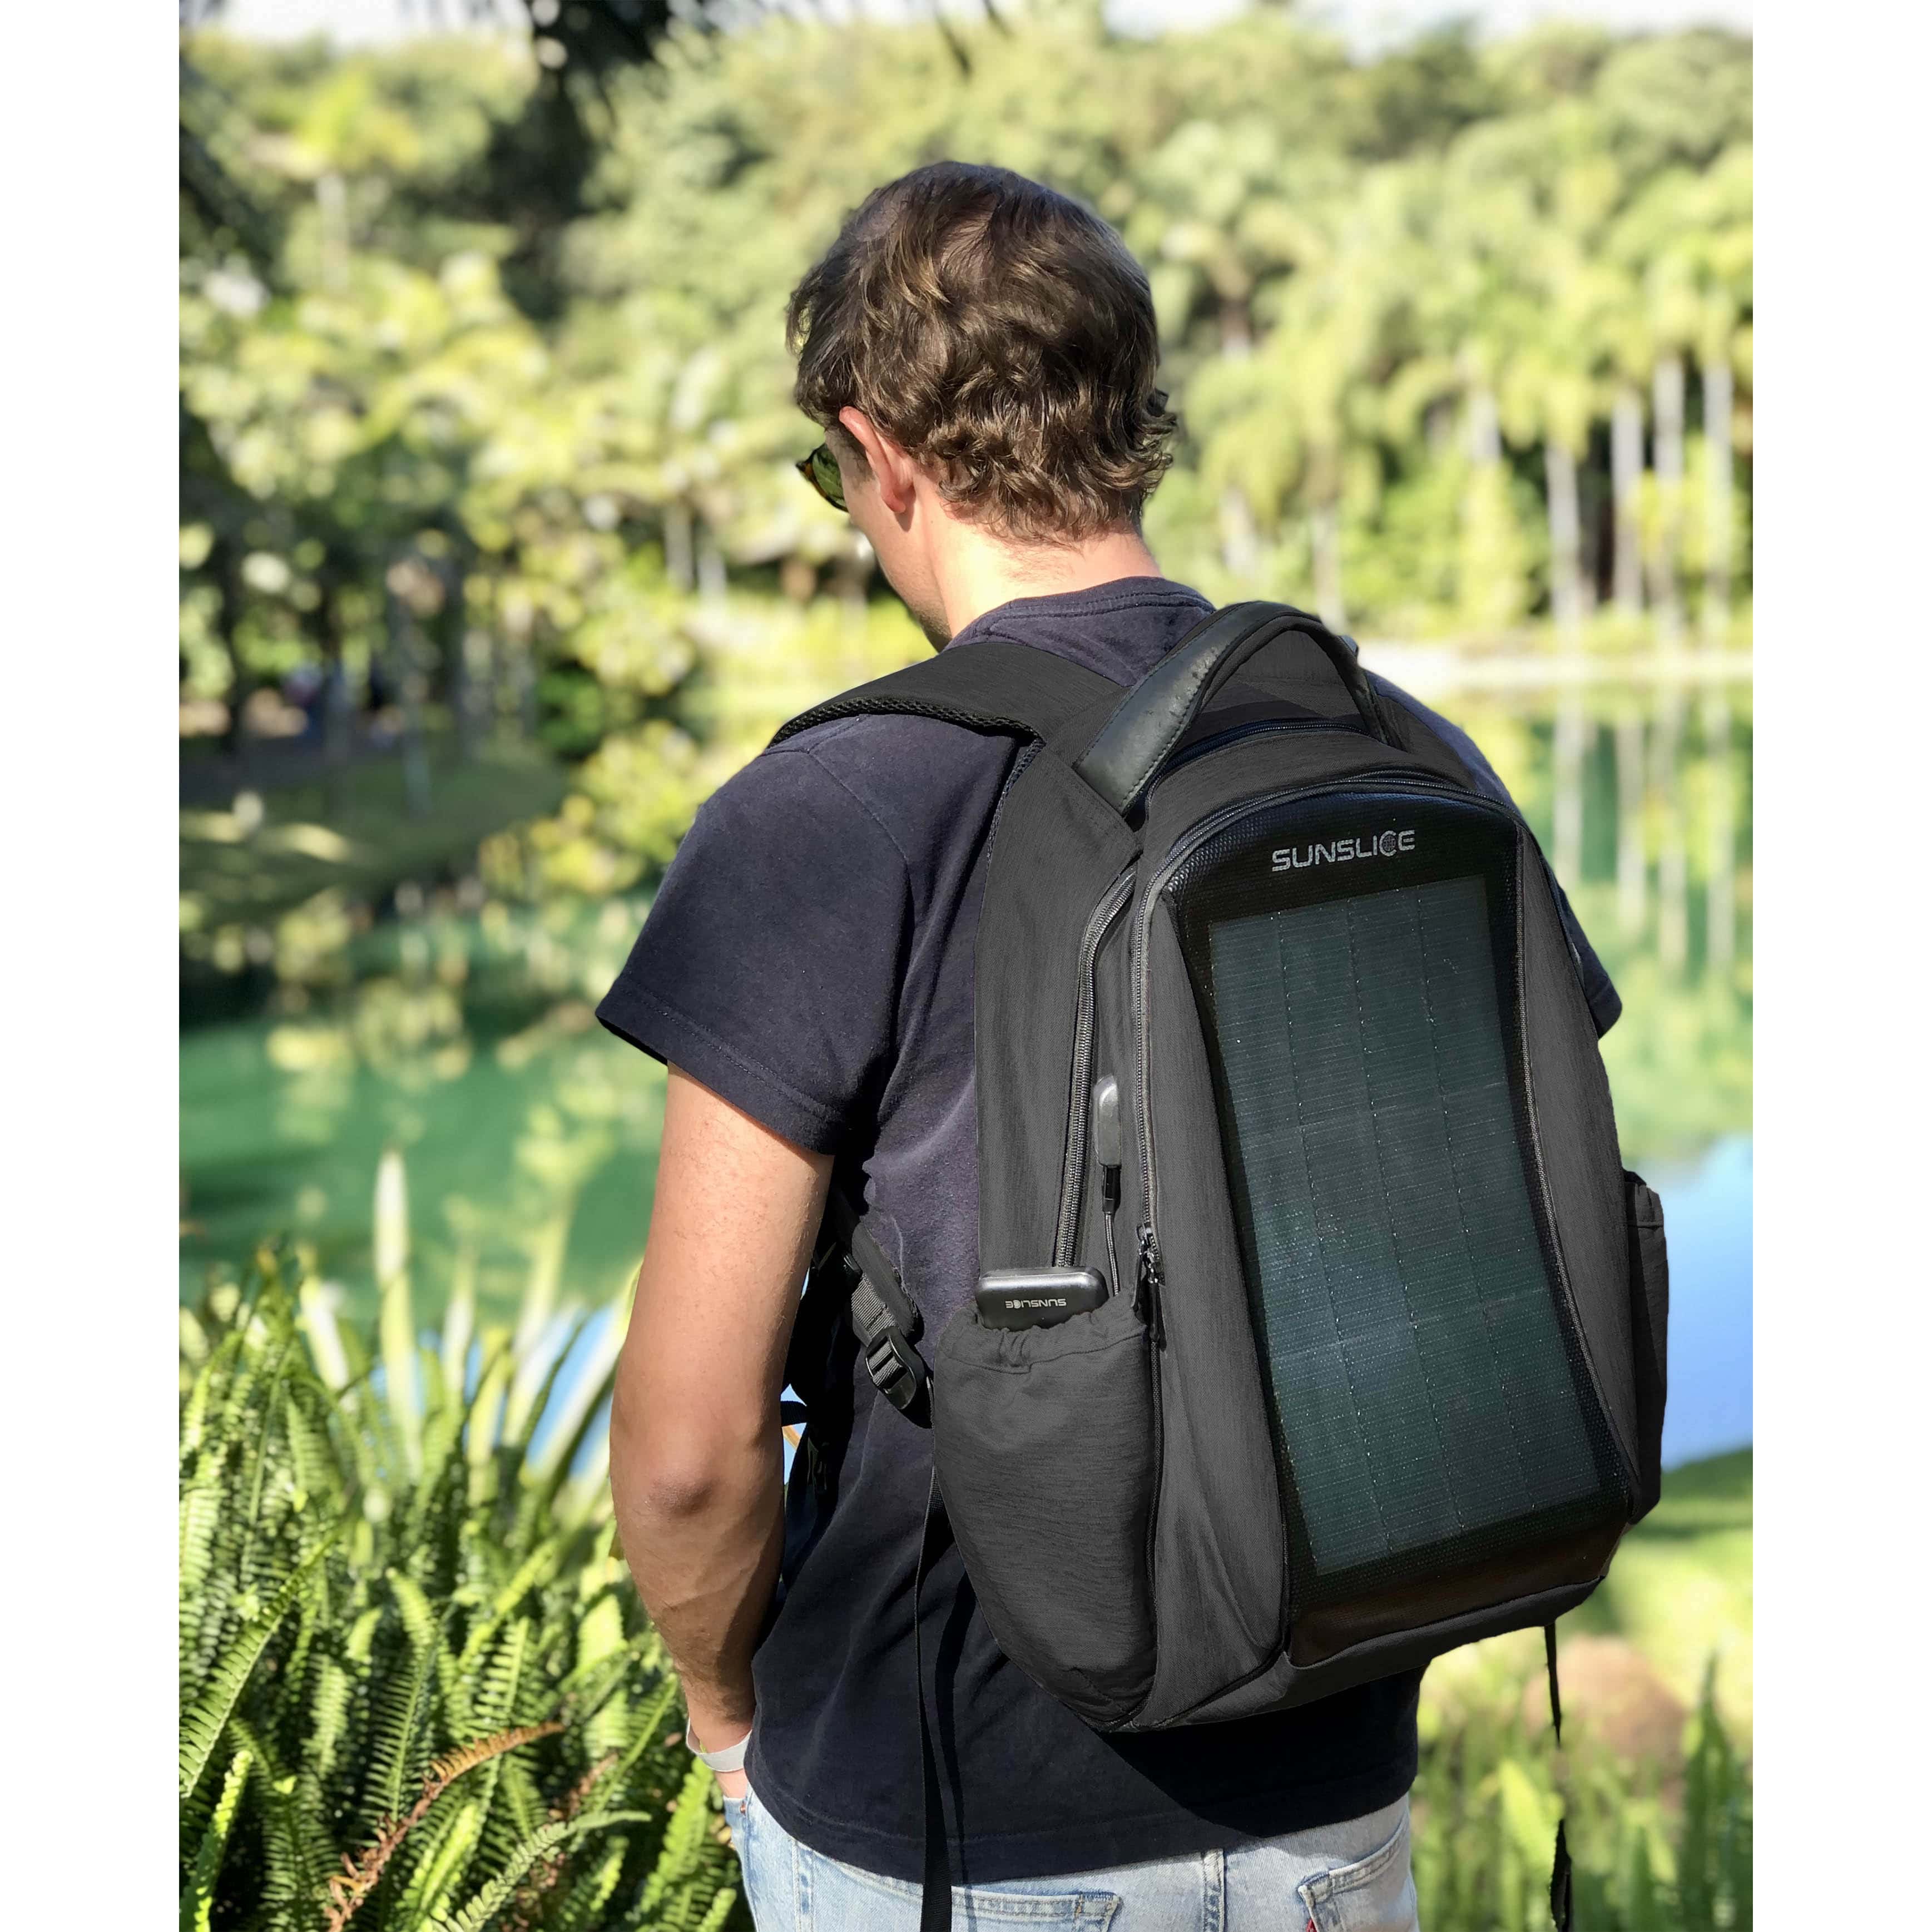 Man looking at a lake with a solar backpack on his back ( Sunslice Zenit in black)